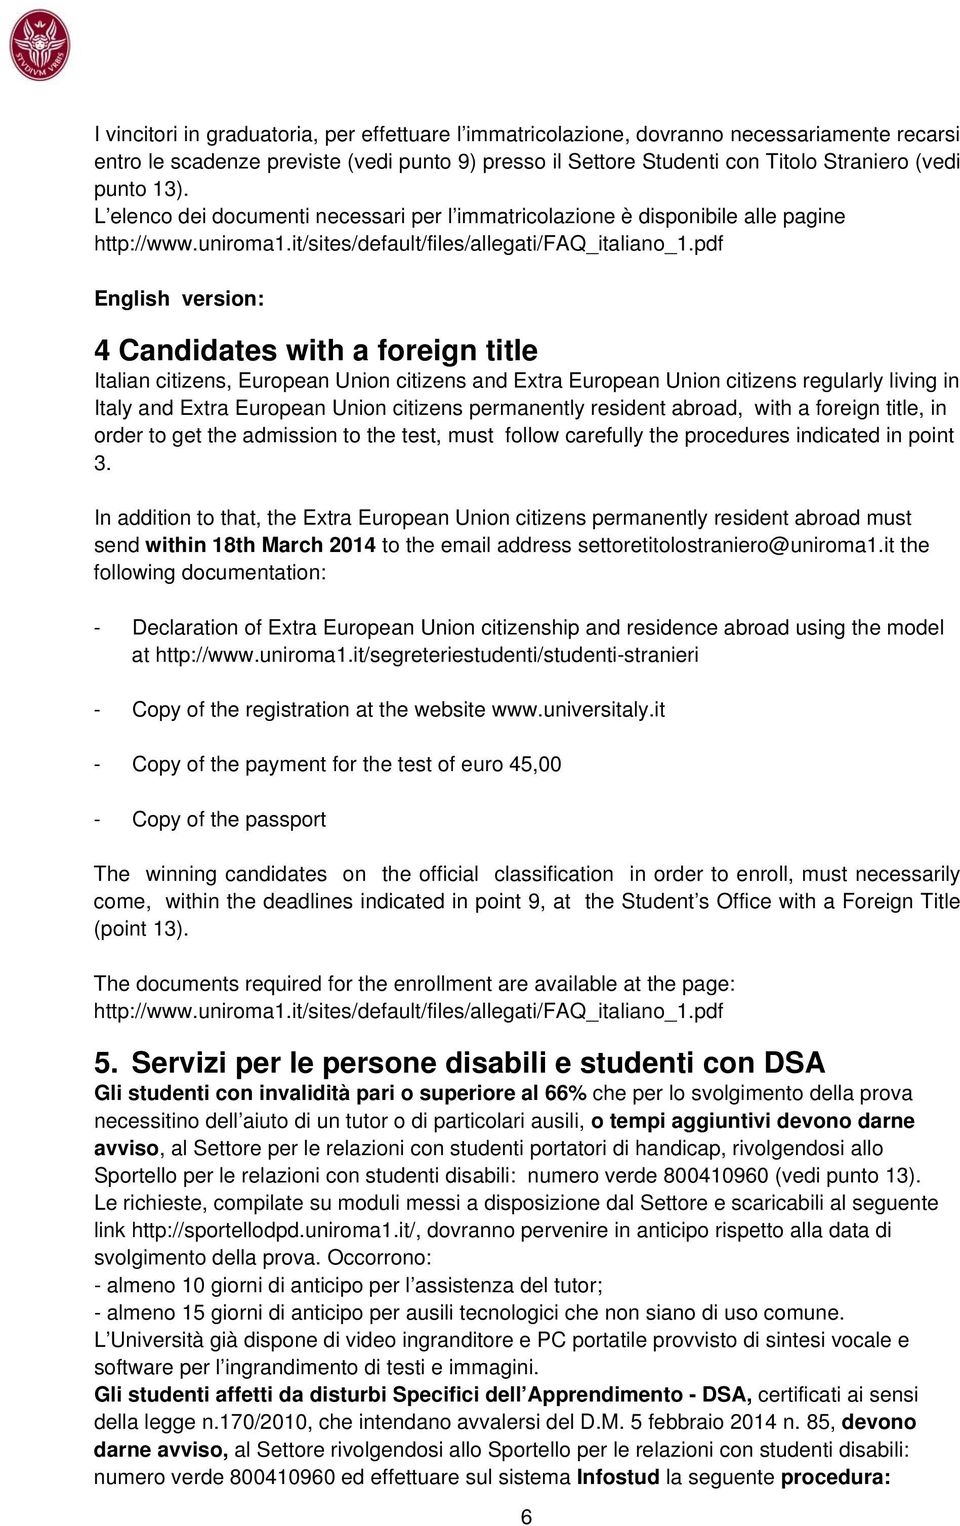 pdf English version: 4 Candidates with a foreign title Italian citizens, European Union citizens and Extra European Union citizens regularly living in Italy and Extra European Union citizens